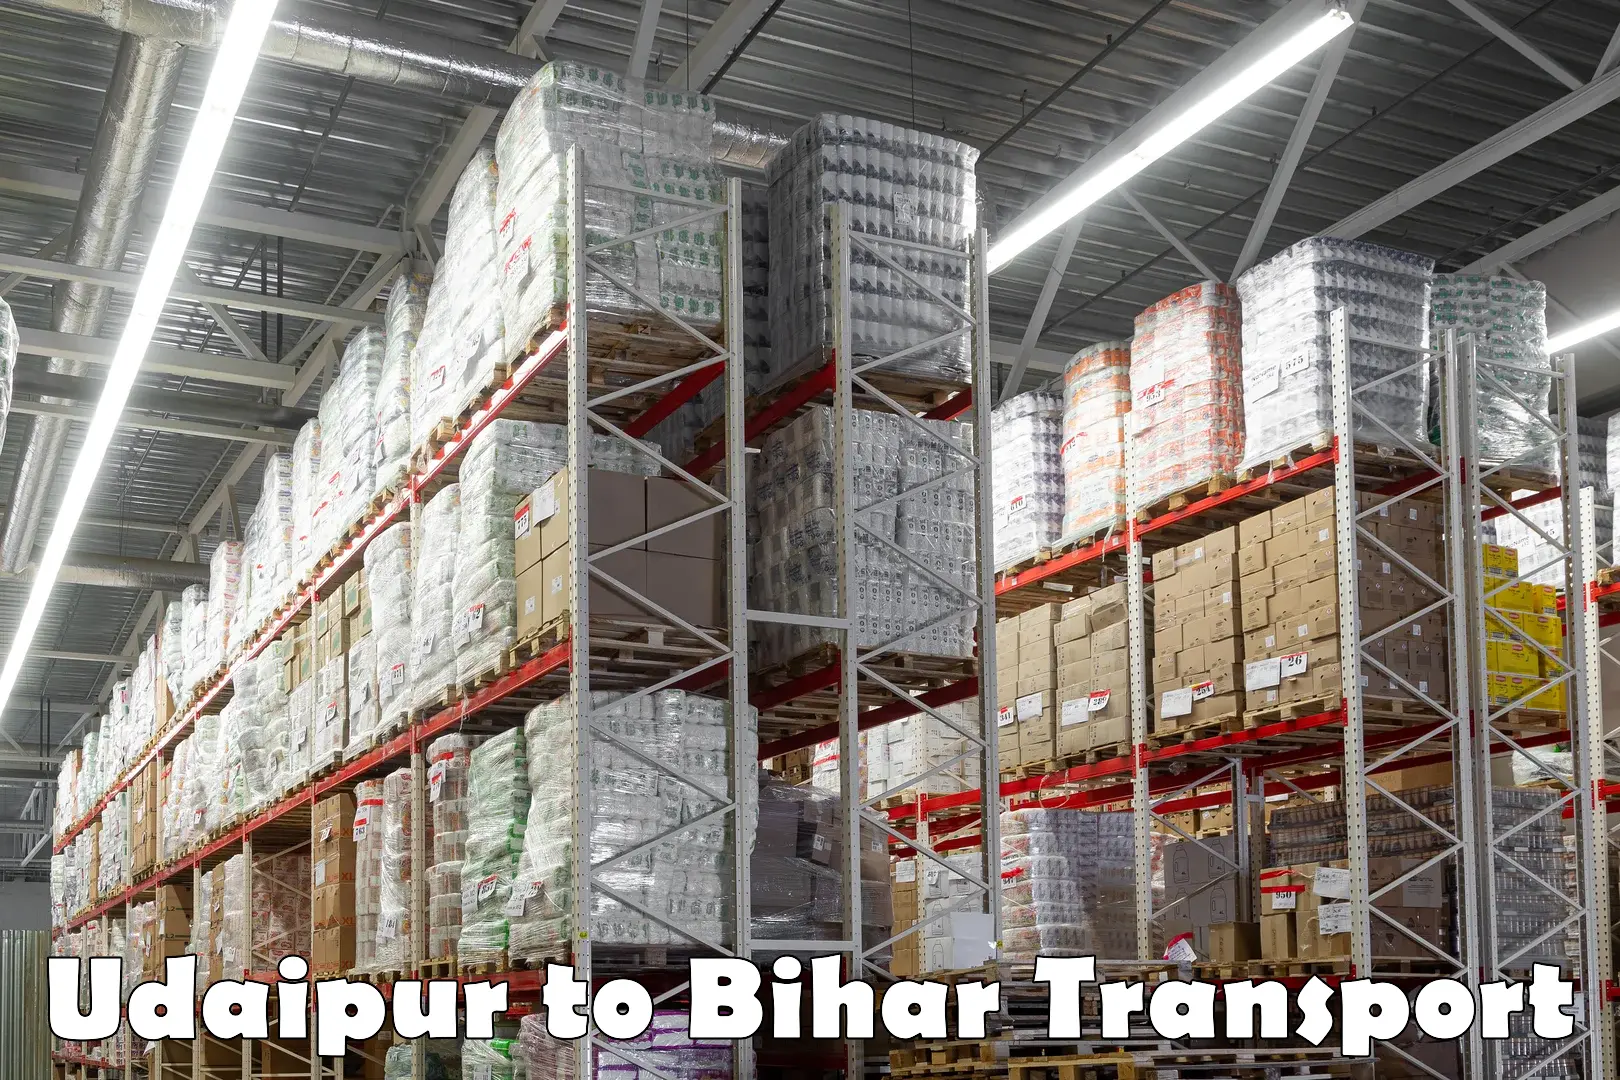 Transport in sharing Udaipur to Bihar